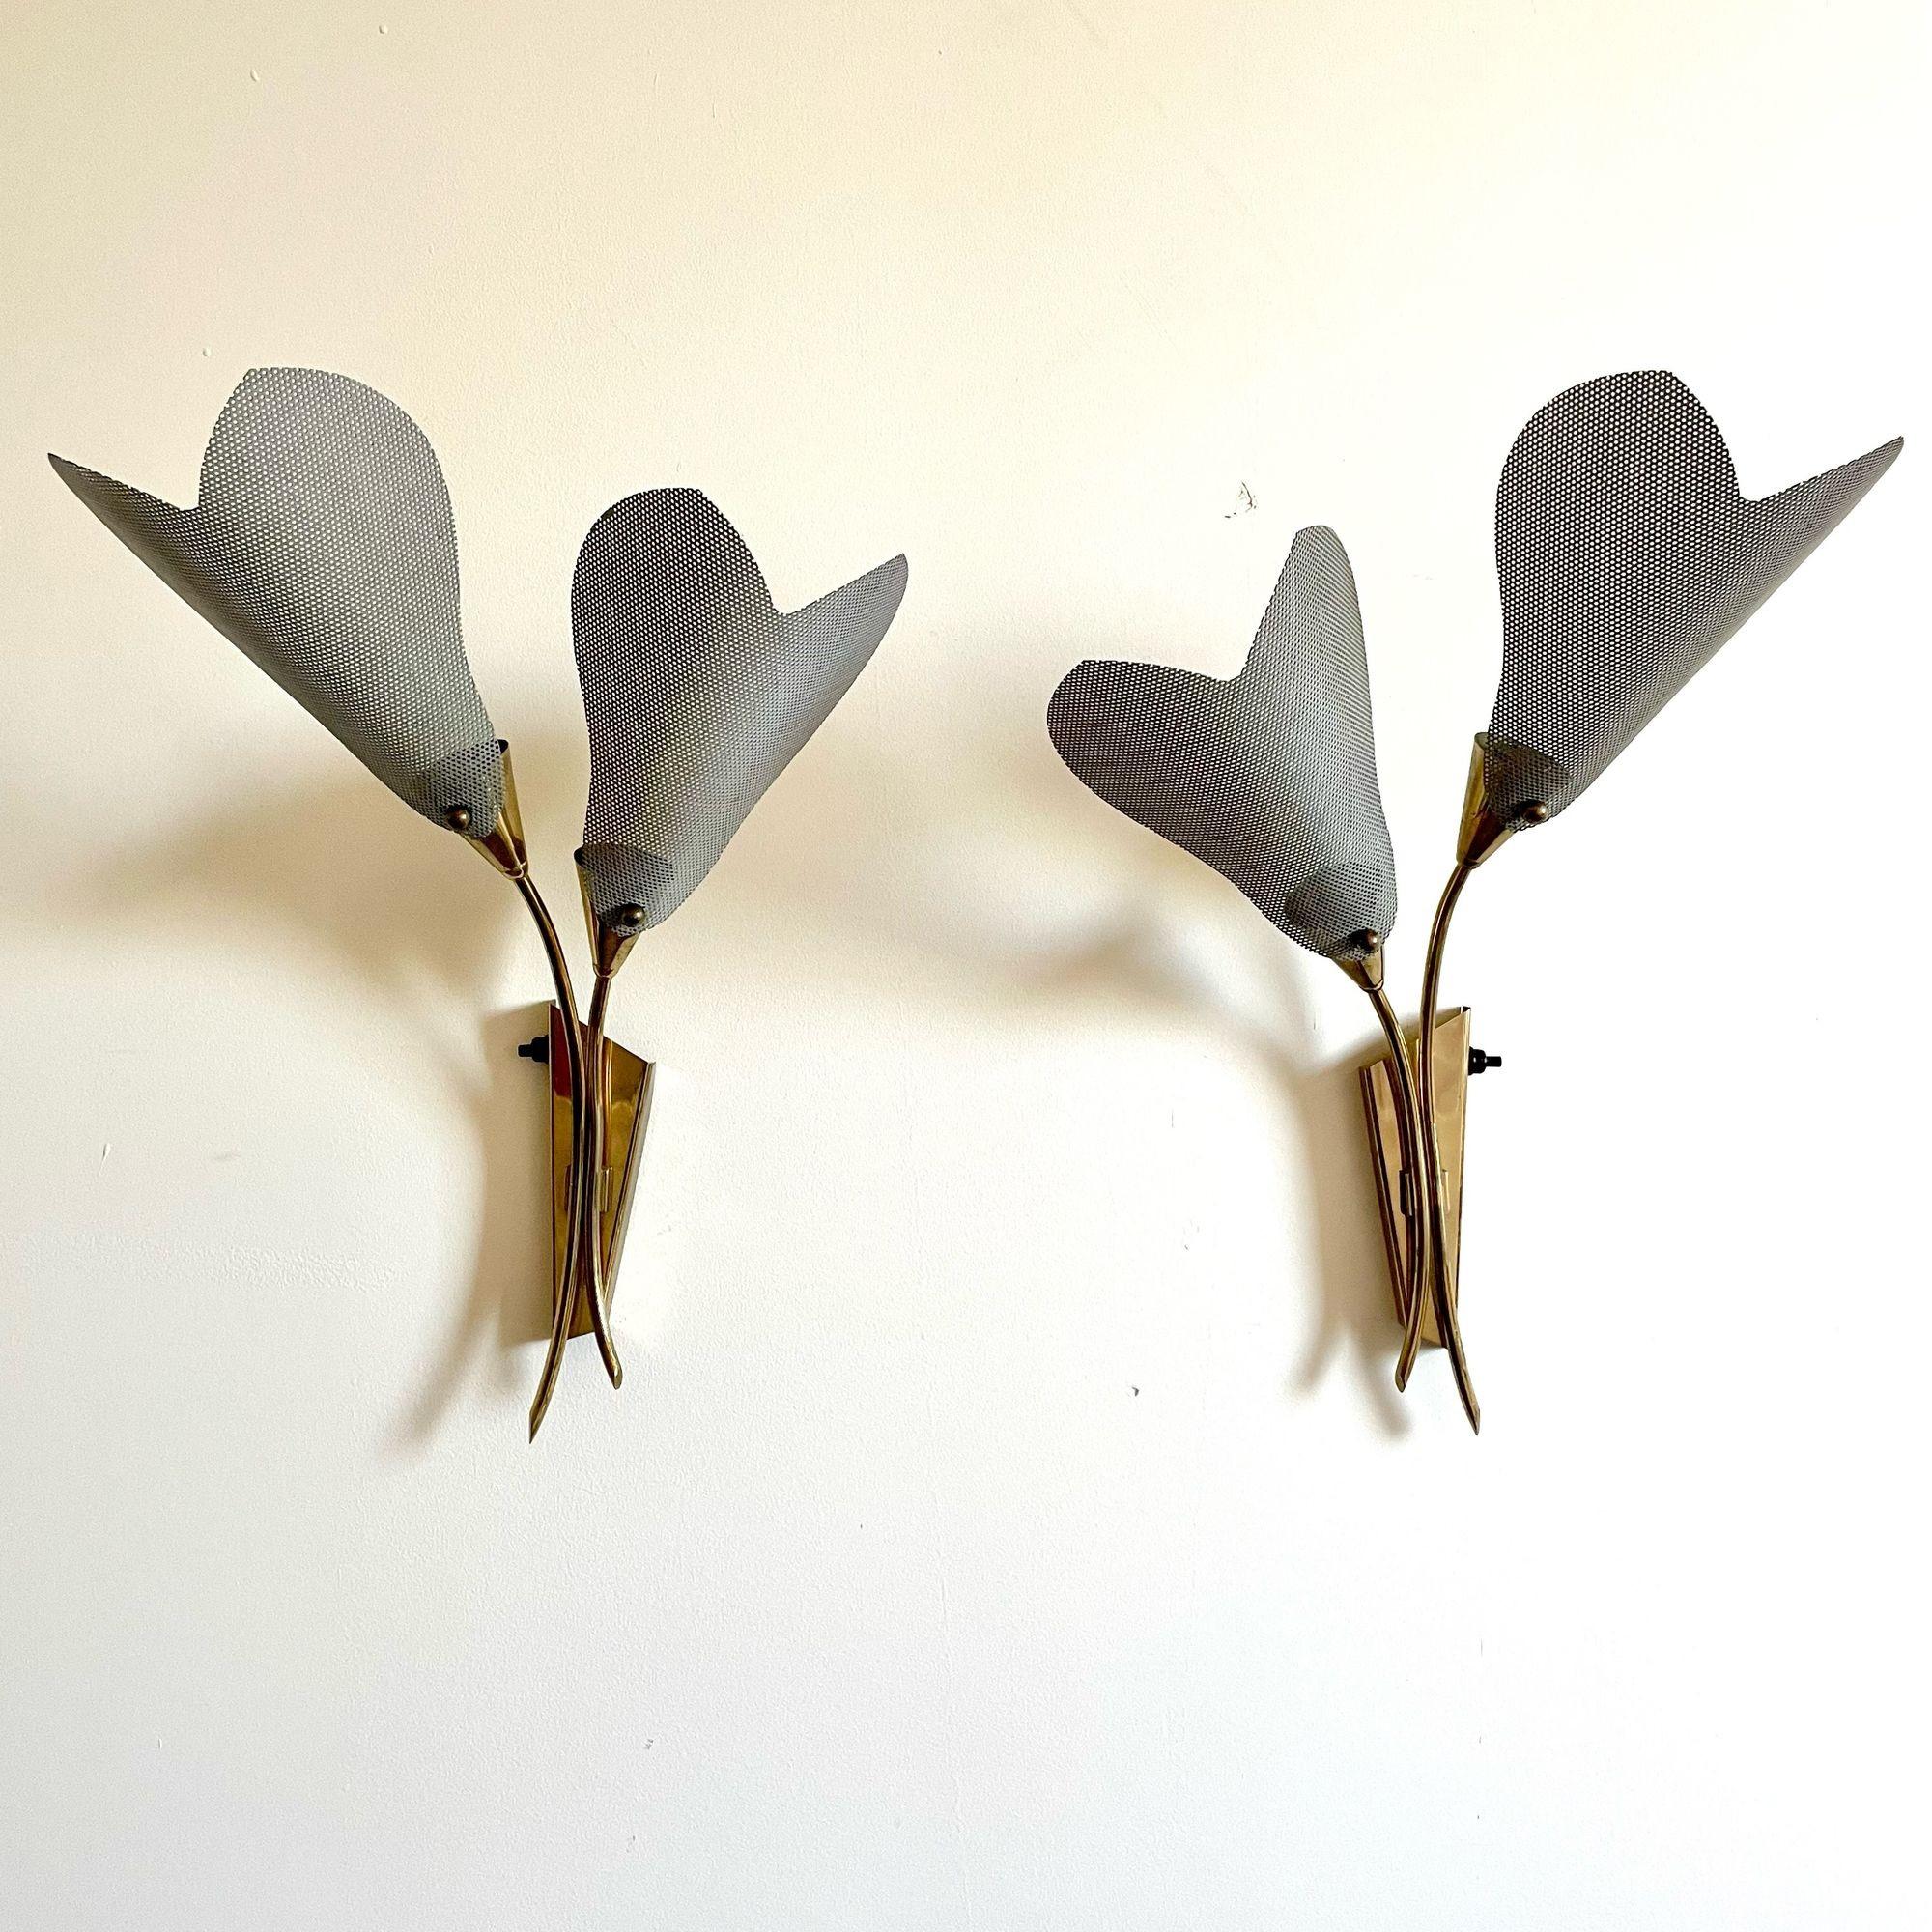 Italian Designer Mid-Century Modern Wall Lights, Flower Sconces, Brass, 1940s

Set of two patinated brass sconces each having two lights covered by metal mesh shades. The pair having a floral motif.

Brass, Mesh Metal
Italy, 1940s

19H x 14W x